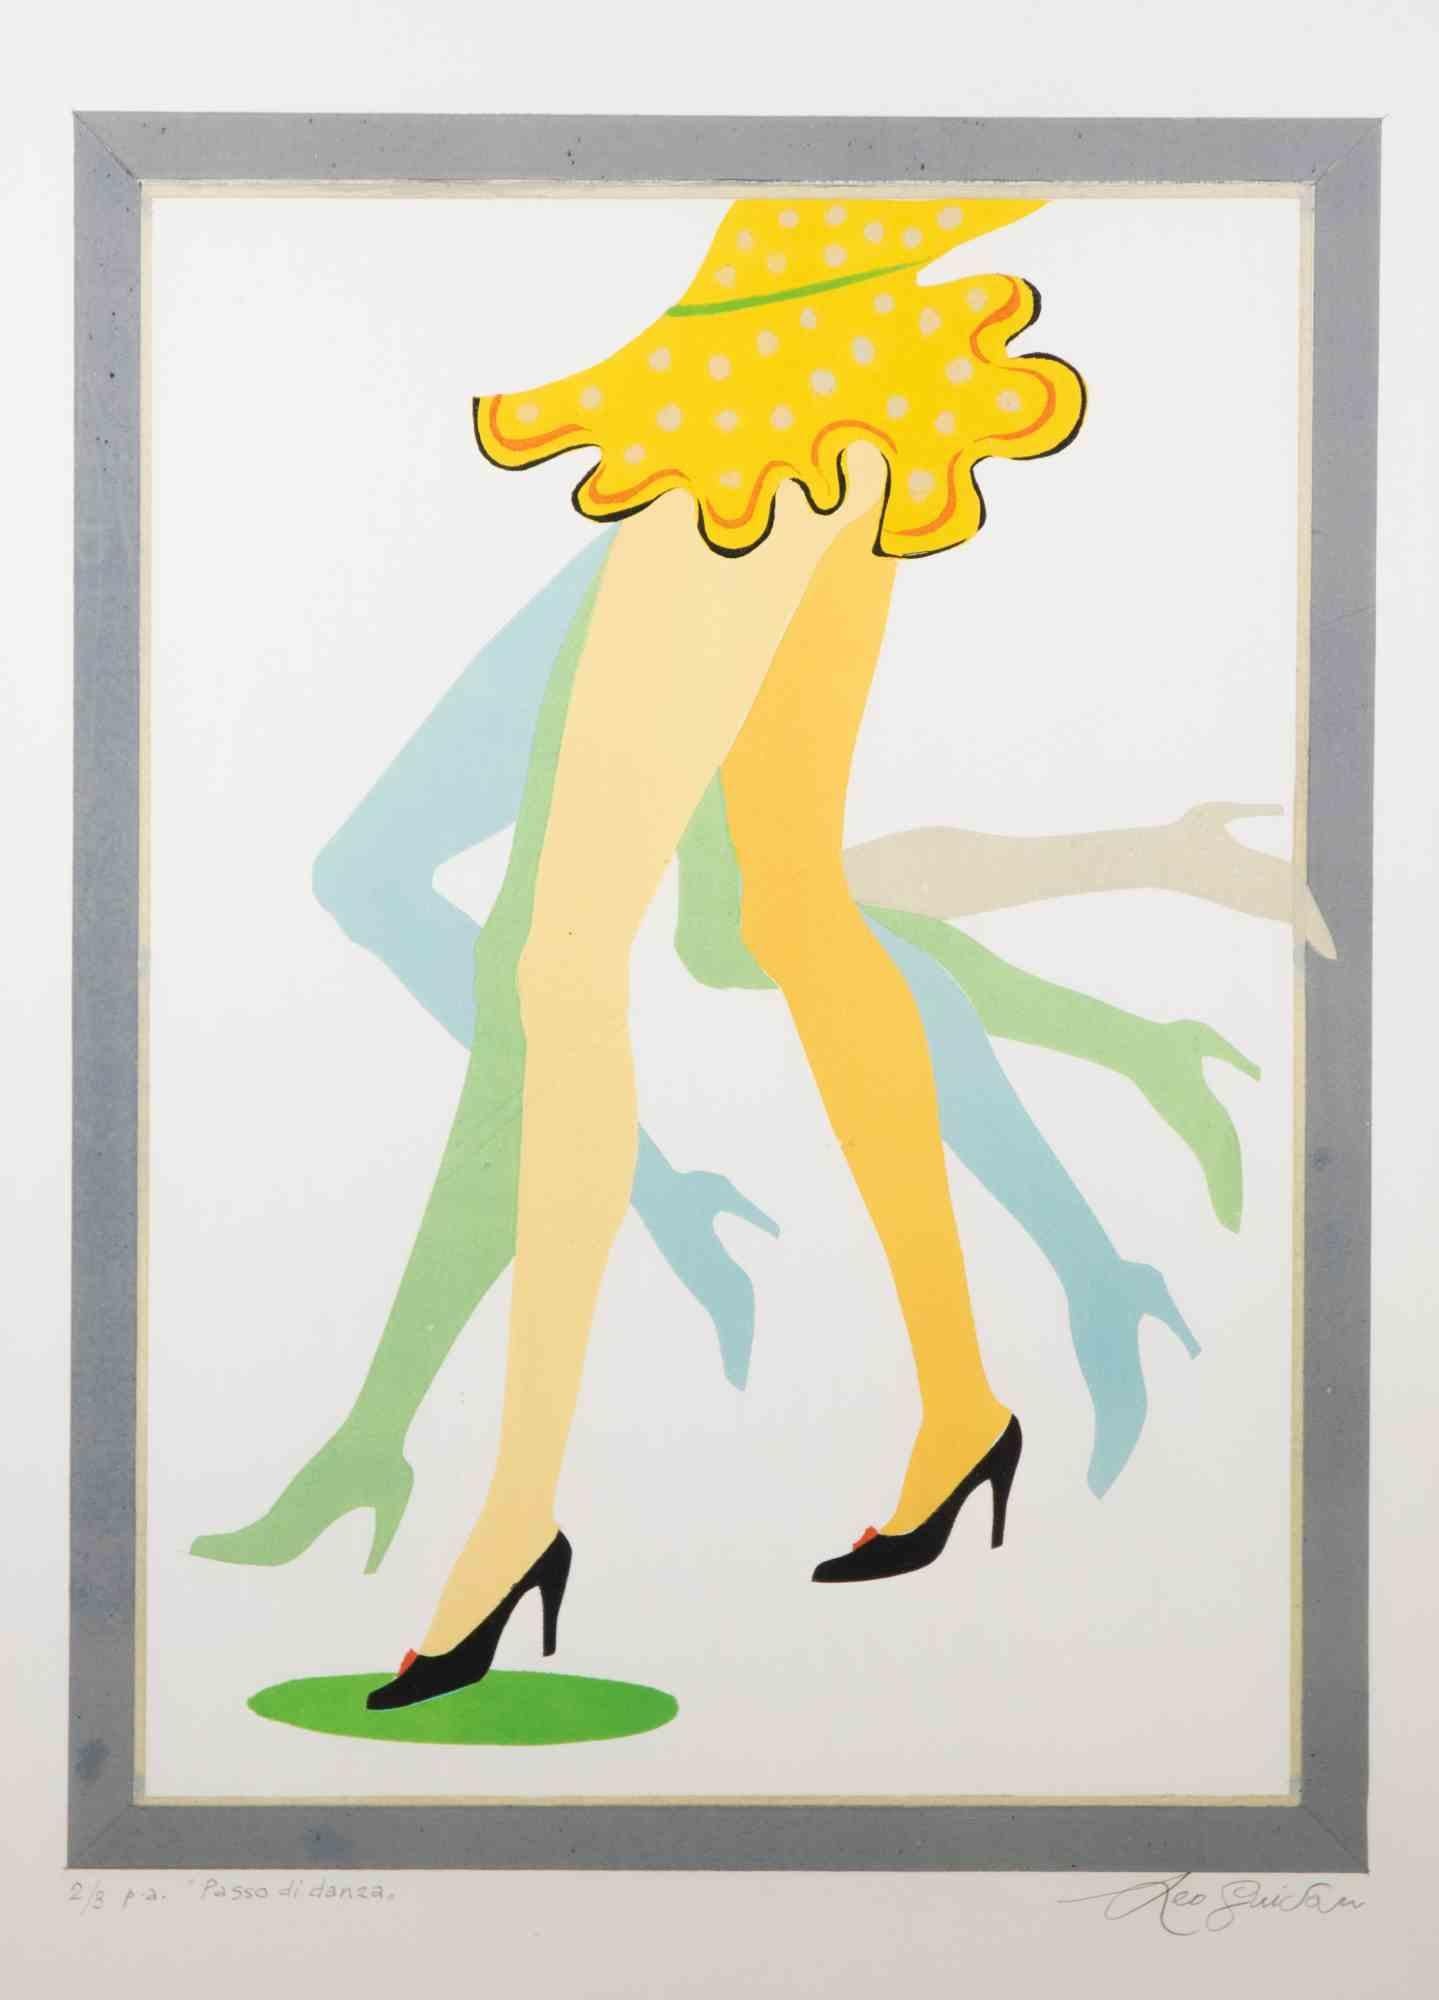 Dance Step is a contemporary artwork realized by Leo Guida in 1975

Mixed colored lithograph.

Hand signed, numbered and titled on the lower margin.

Original title: Passo di danza

Edition 2/3

Includes frame

Leo Guida  (1992 - 2017). Sensitive to